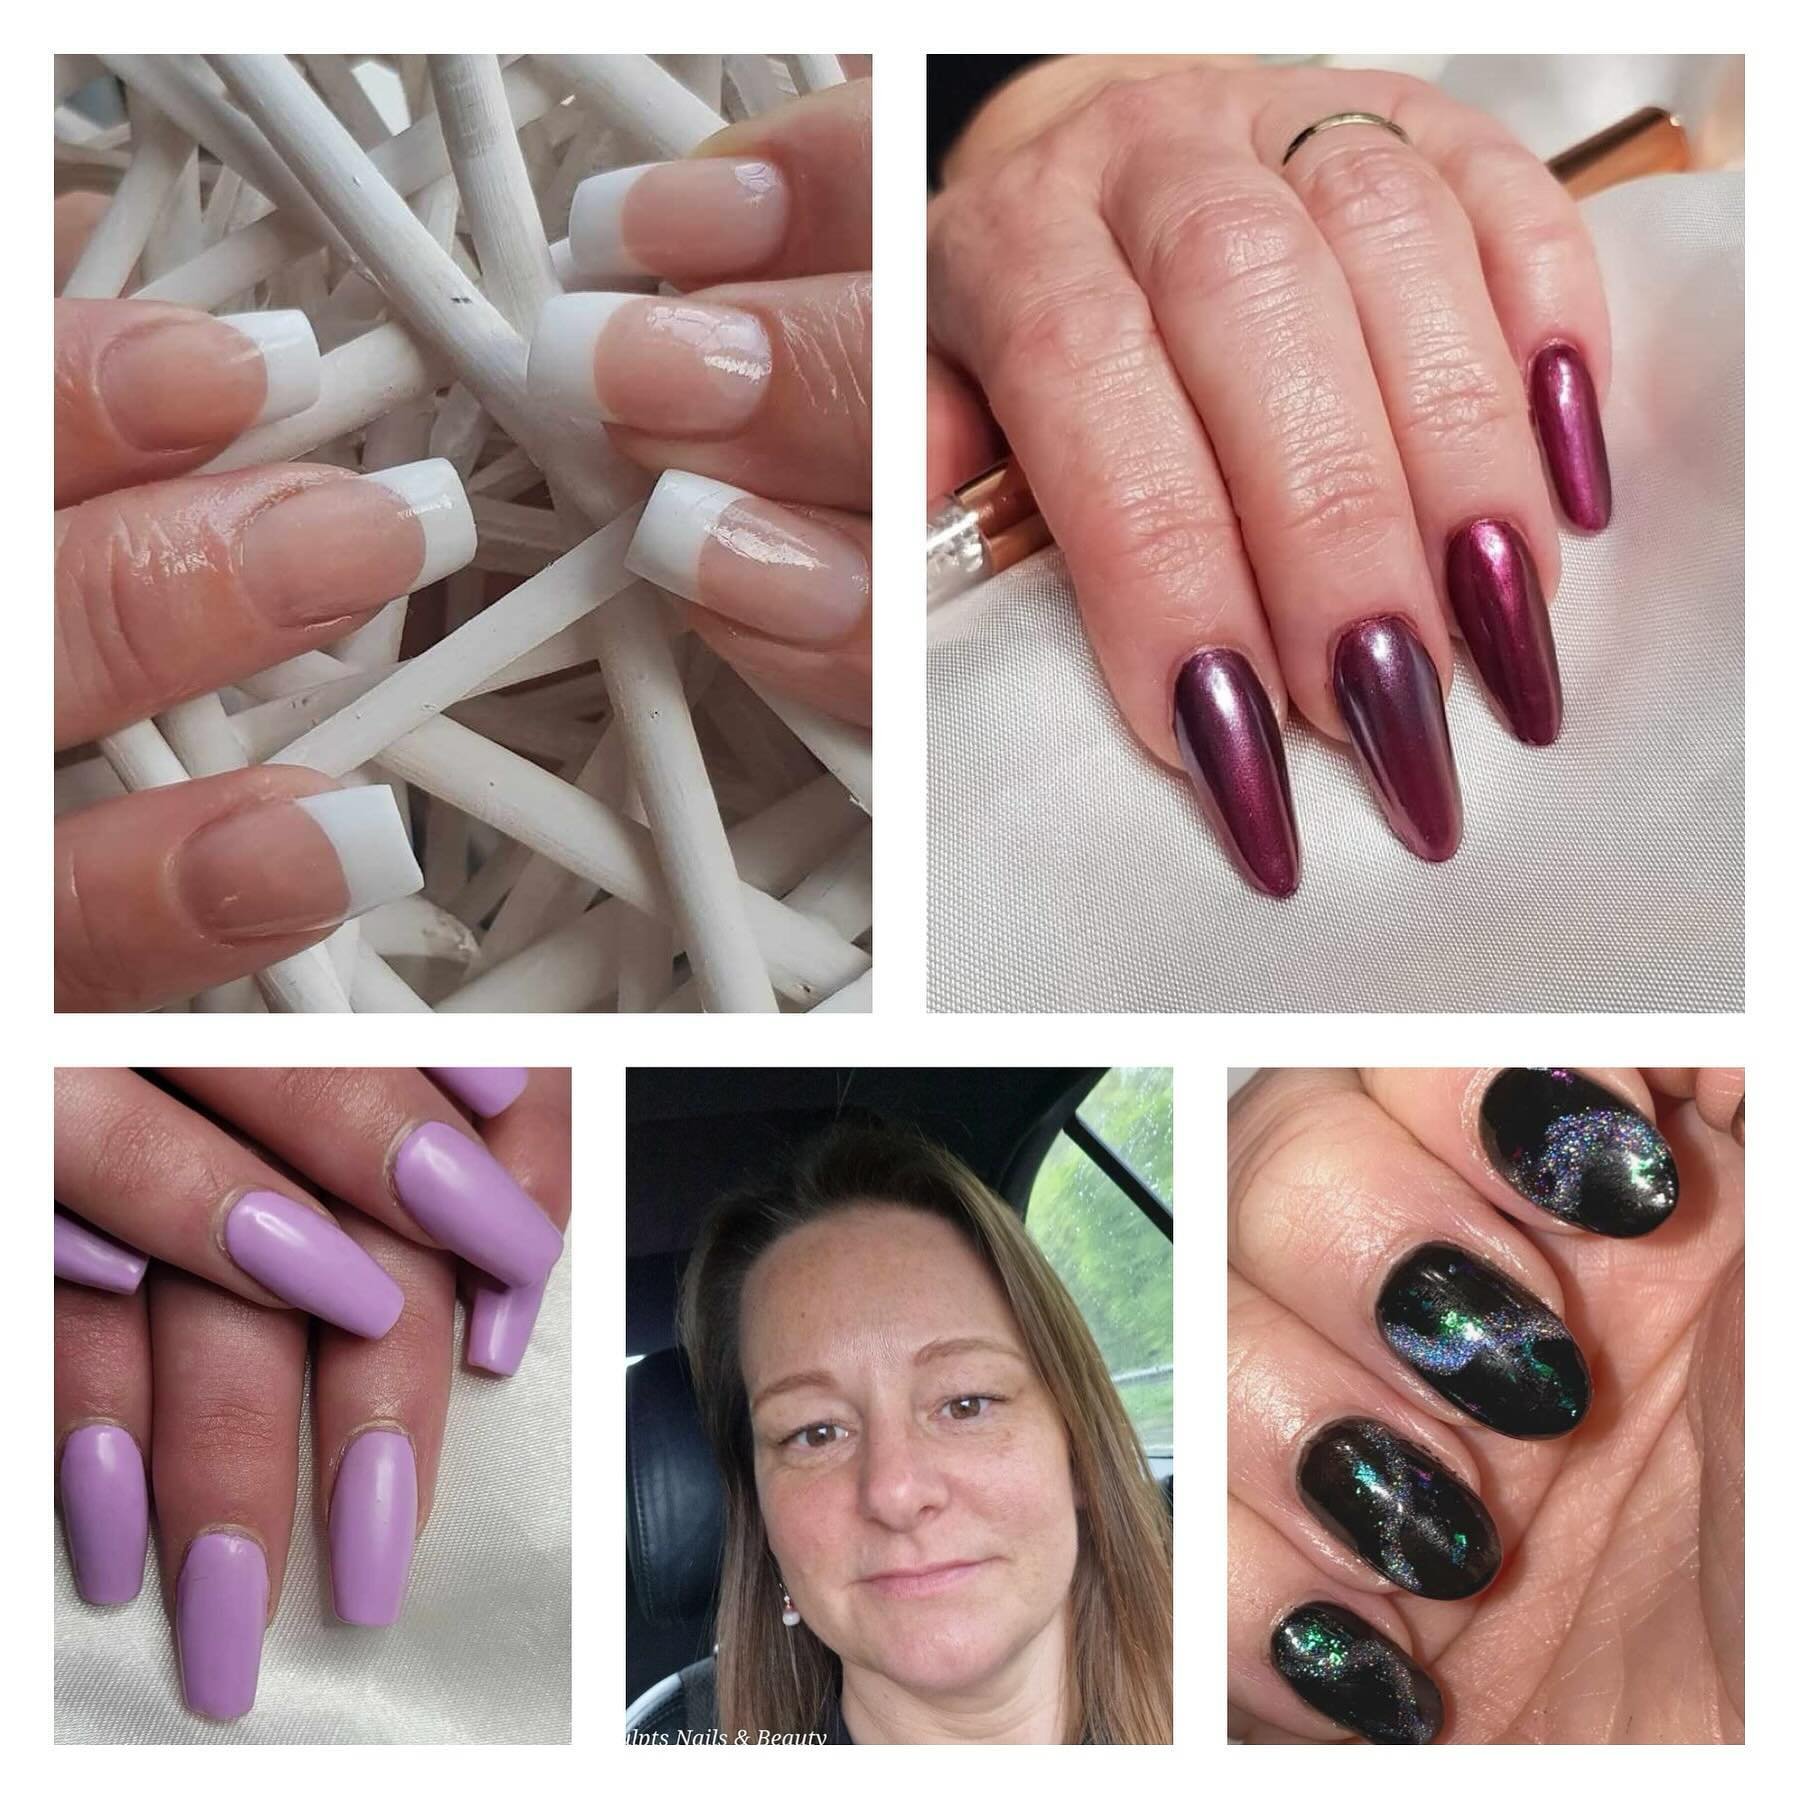 Exciting news! We have a new junior tech joining team Nail Boutique. A warm welcome to Michelle!

Michelle&rsquo;s a passionate tech with an eye for detail. She started her nail journey back in 2003 and after a break to delve into the beauty industry